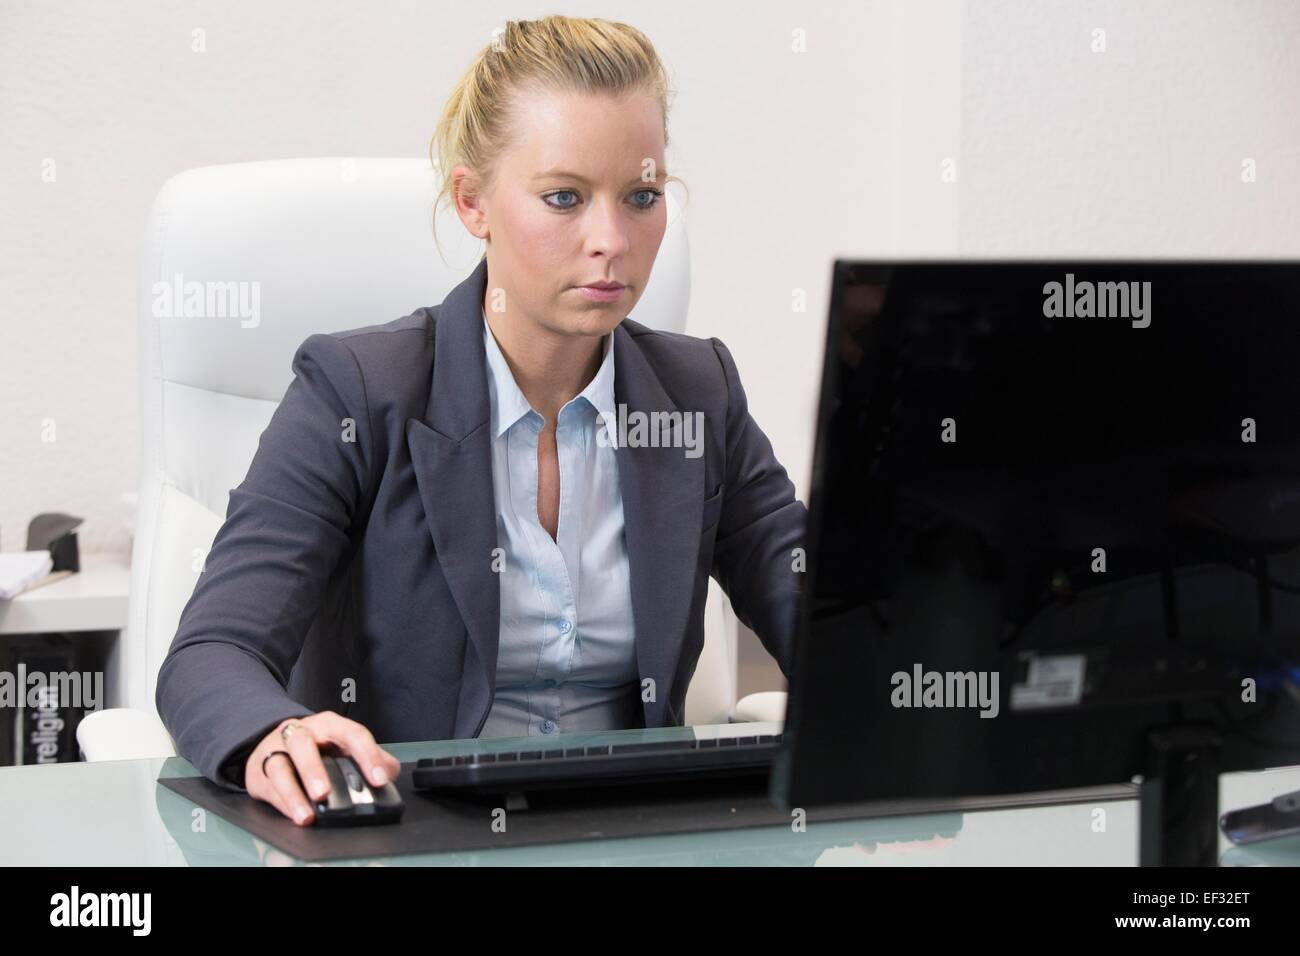 Business woman working on computer, 15 January 2015. Stock Photo